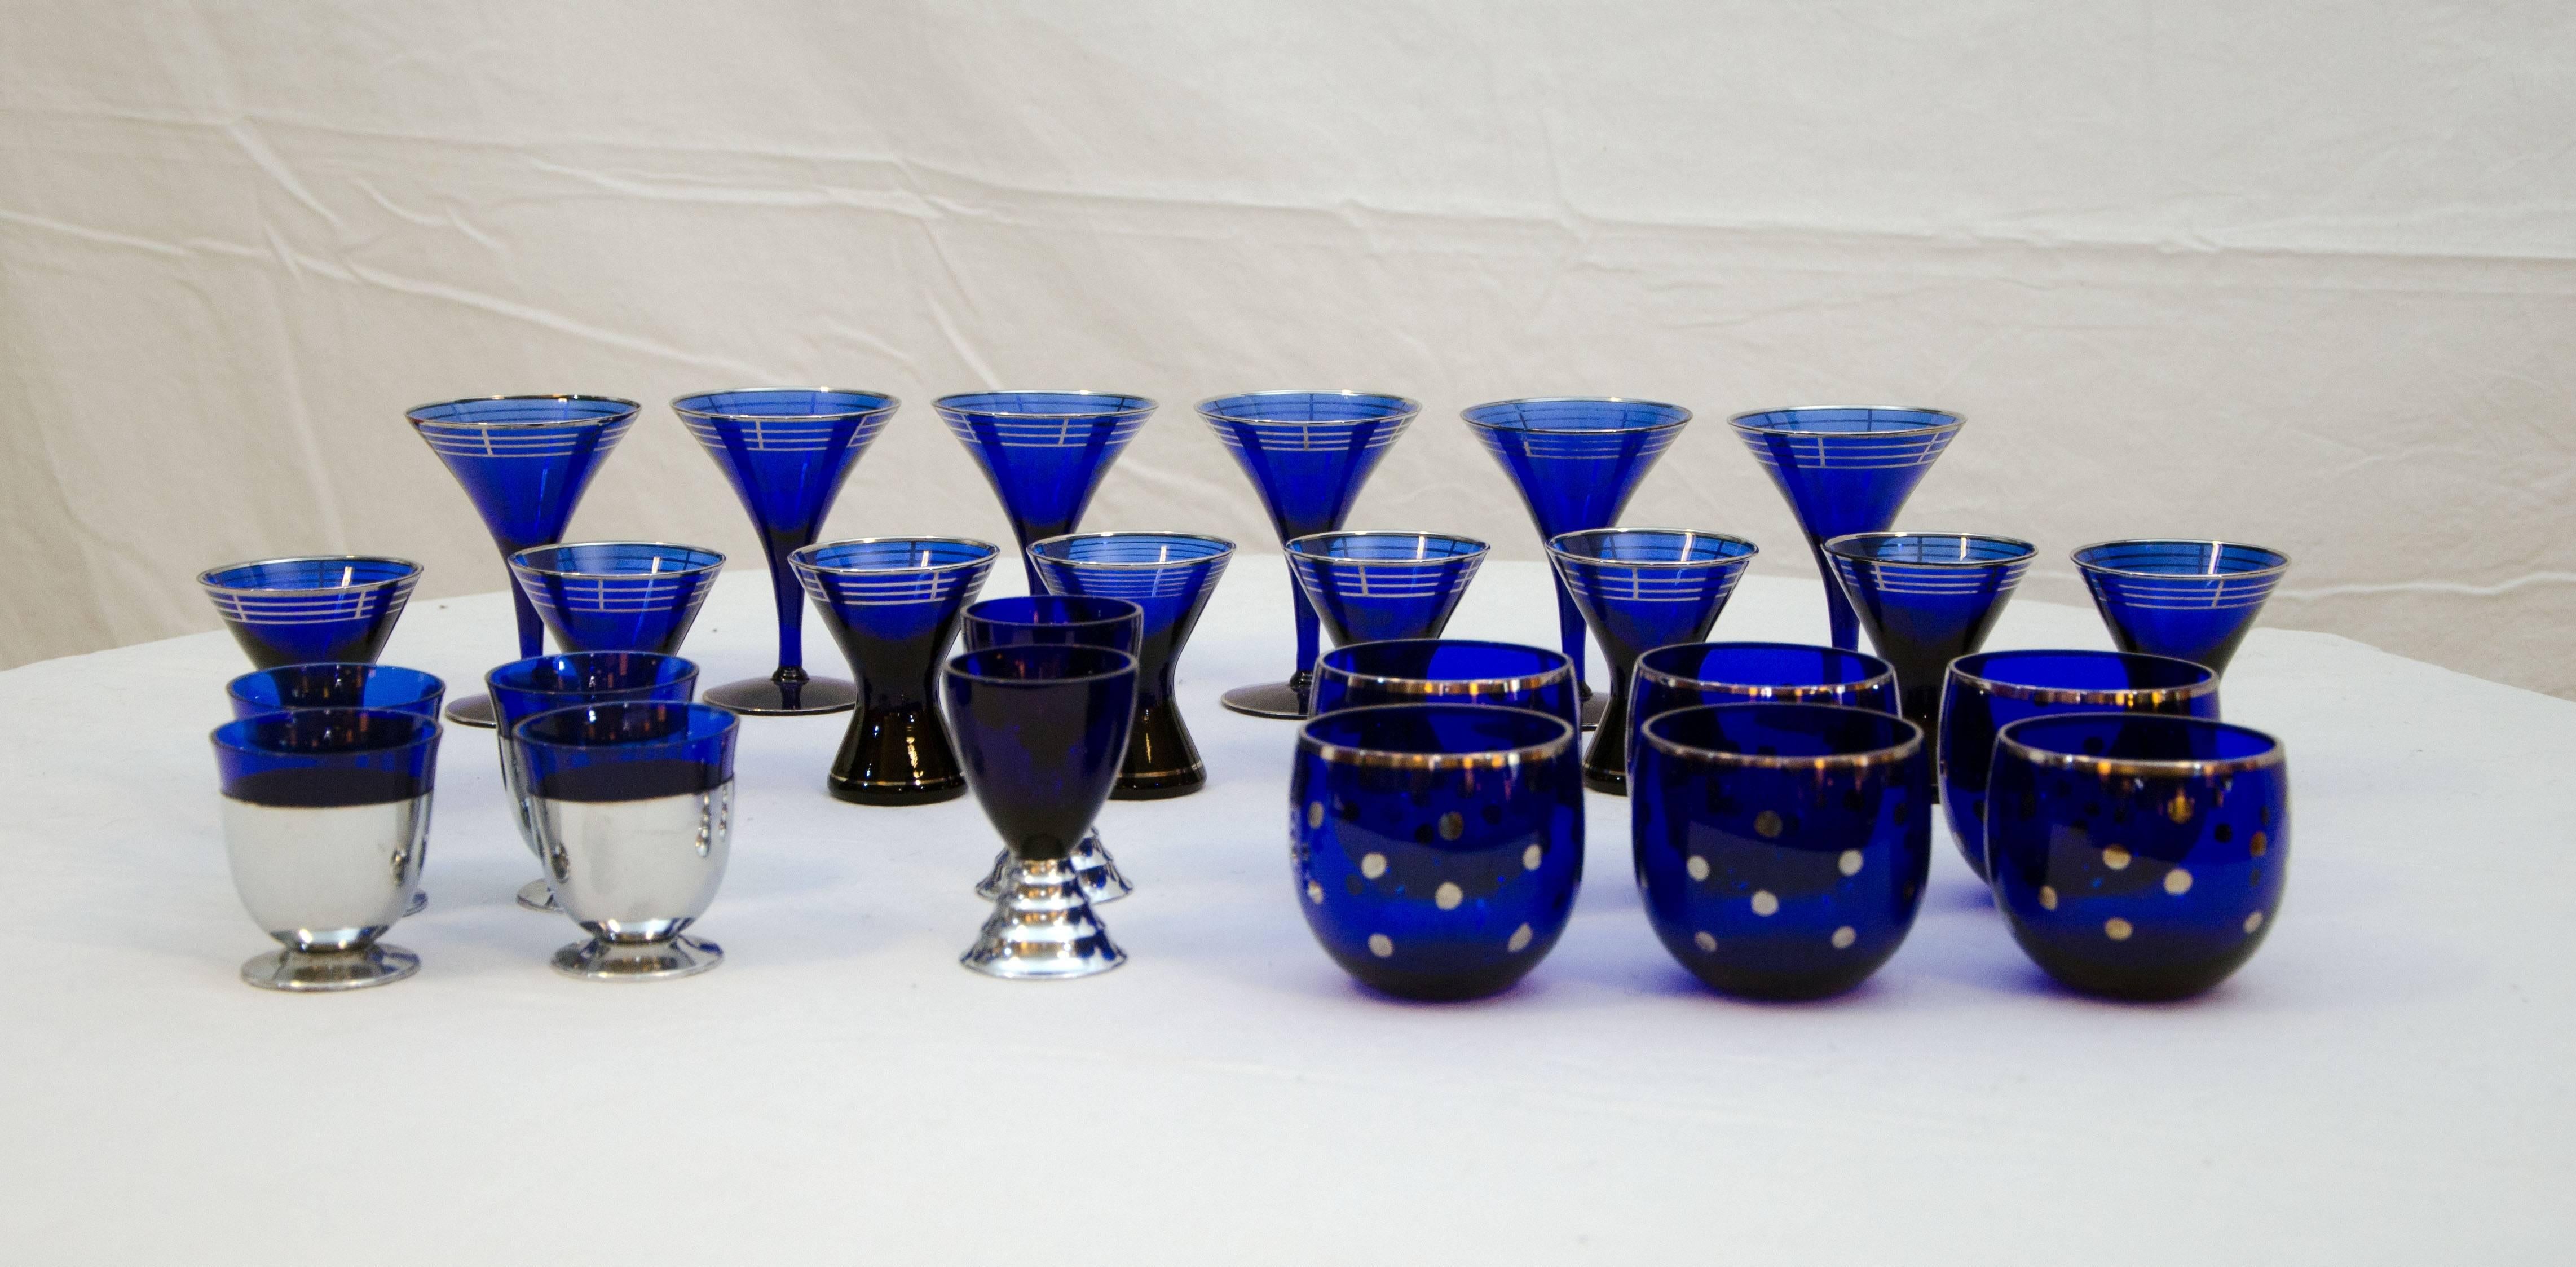 American Collection of Art Deco Cobalt Blue Cocktail or Bar Glassware